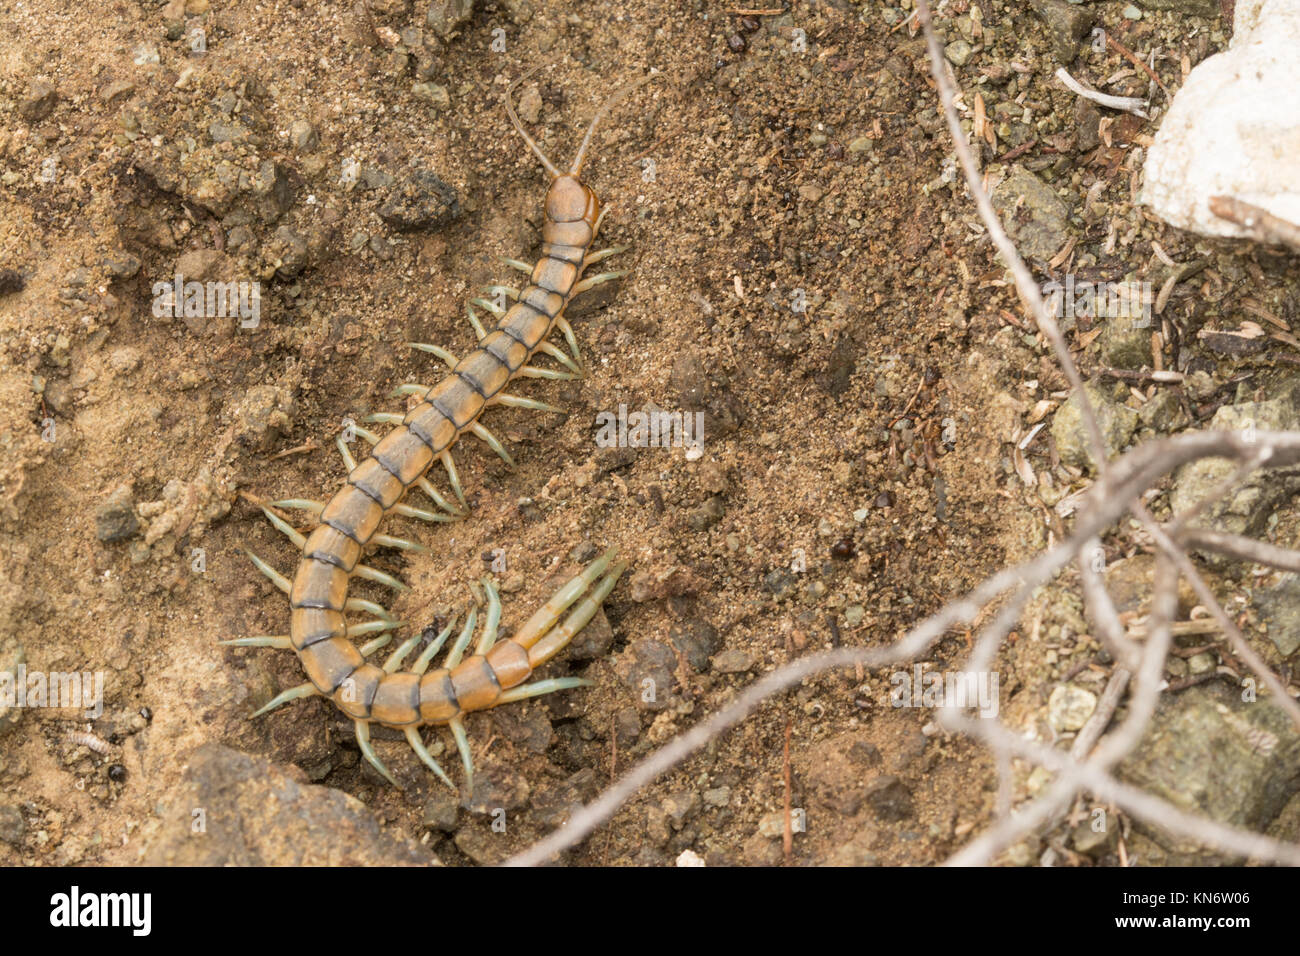 Close-up of a Megarian banded centipede (Scolopendra cingulata) in Cyprus Stock Photo